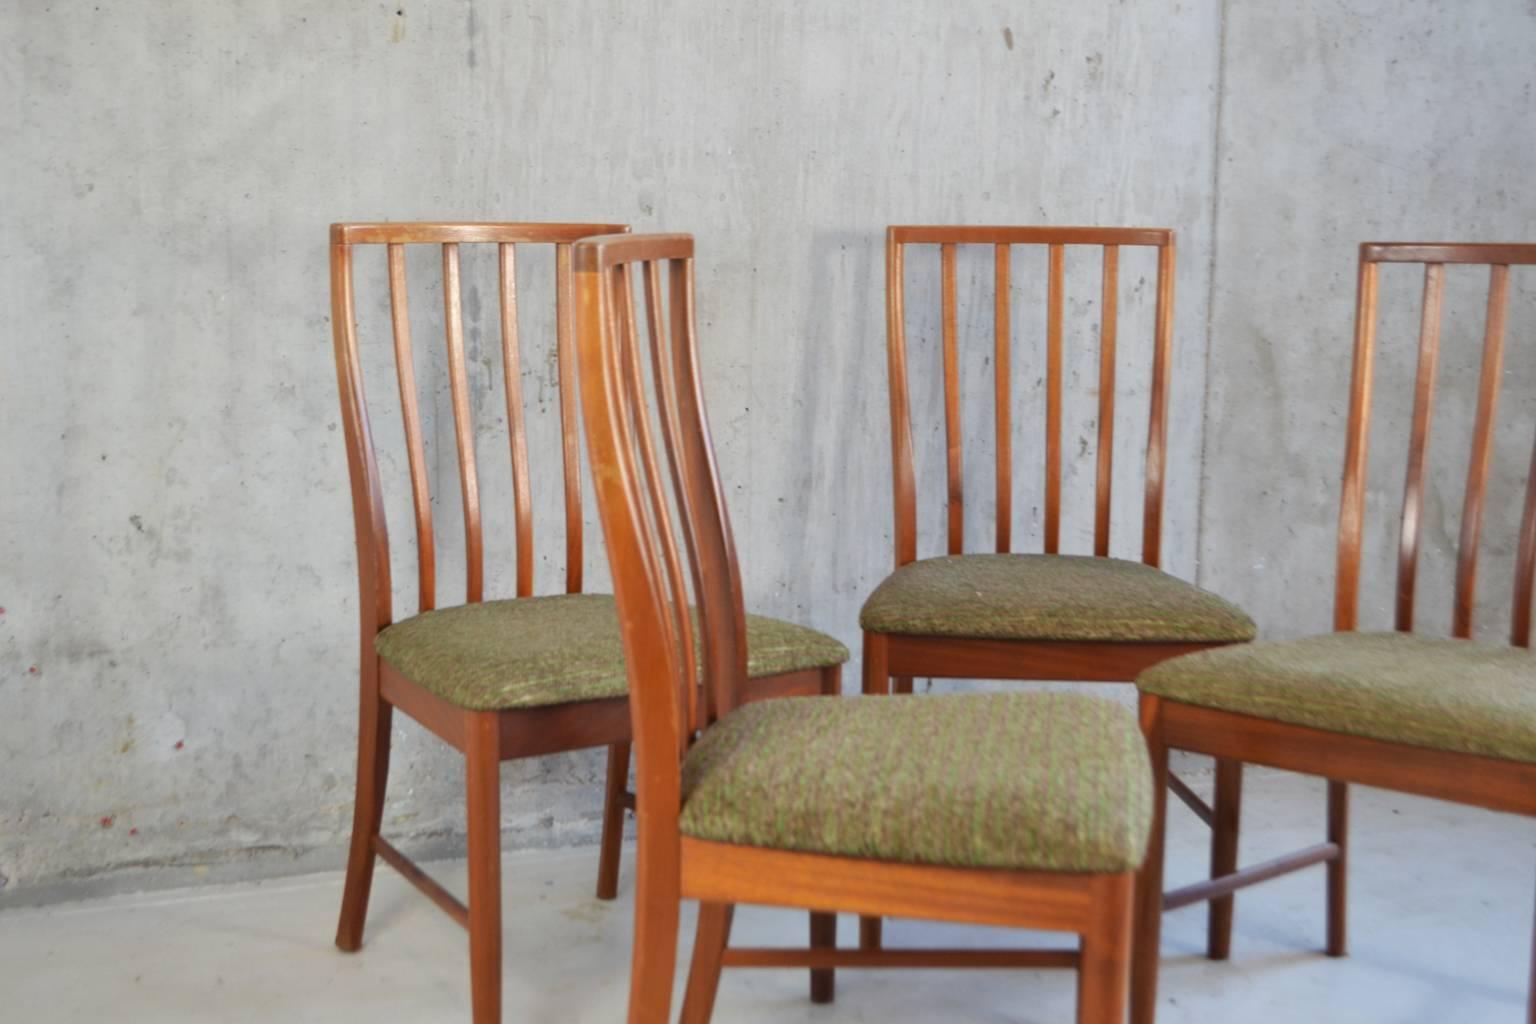 A fine set of four G-Plan high back dining chairs from the Fresco range, design by Leslie Dandy for G Plan. The chairs are incredibly comfortable and well made from solid teak with a shaped slatted back and upholstered seat with its original